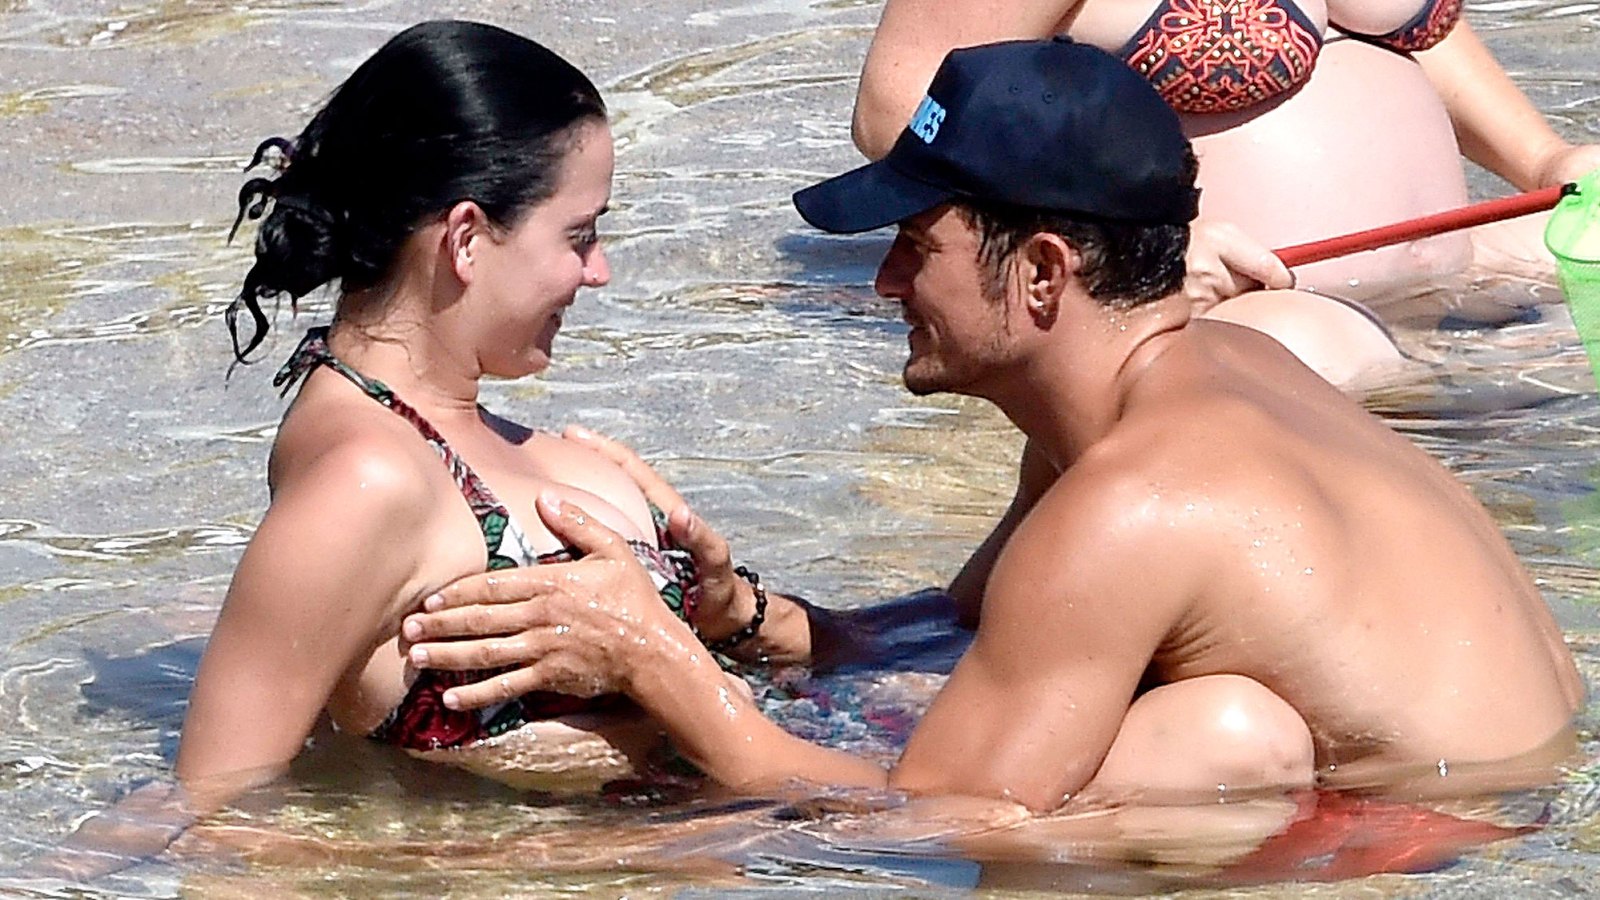 Katy Perry Porn - Orlando Bloom Grabs Katy Perry's Boobs During Beach Vacation